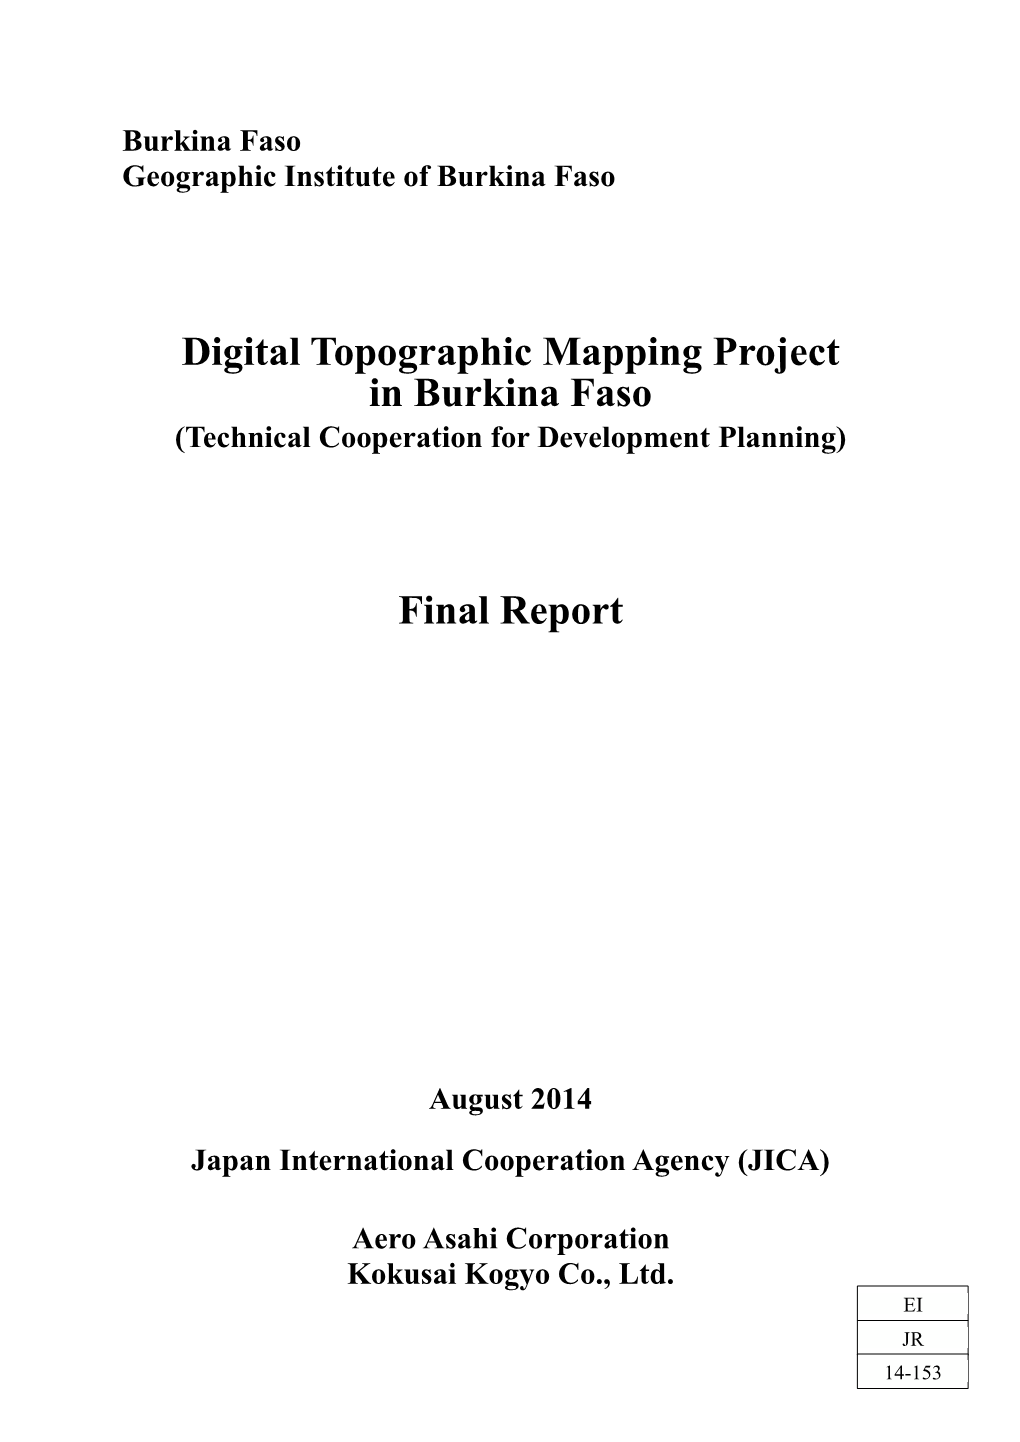 Digital Topographic Mapping Project in Burkina Faso Final Report